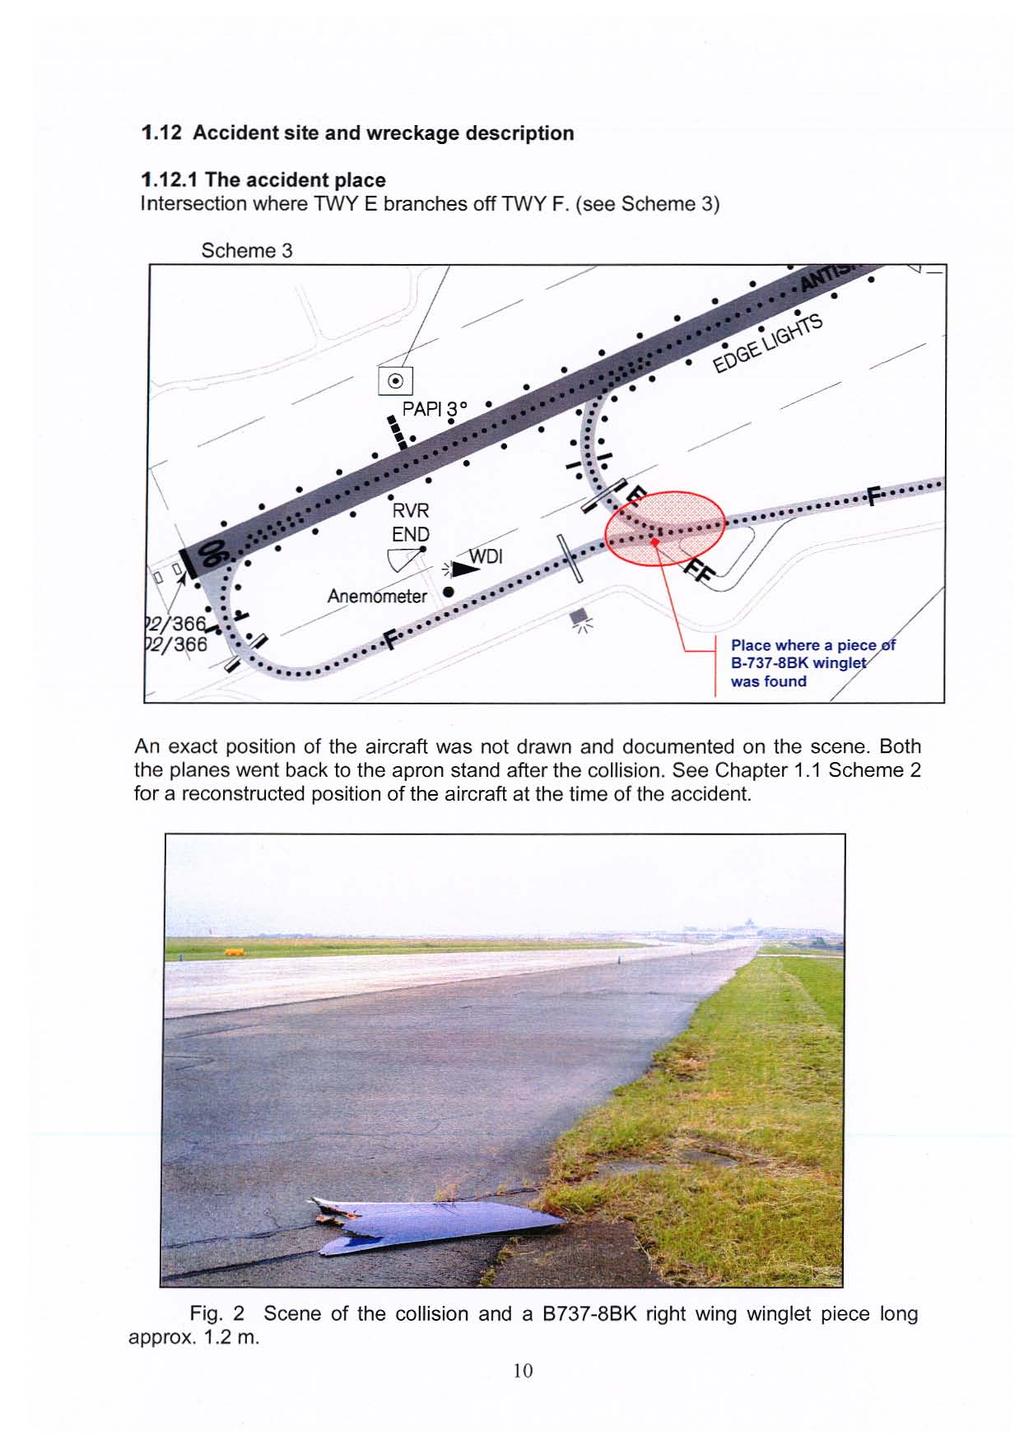 1.12 Accident site and wreckage description 1.12.1 The accident place Intersection where TWY E branches offtwy F. (see Scheme 3) Scheme 3 Anemometer /~... END..-/' ;?-,~DI ~ ", \\ Place where.